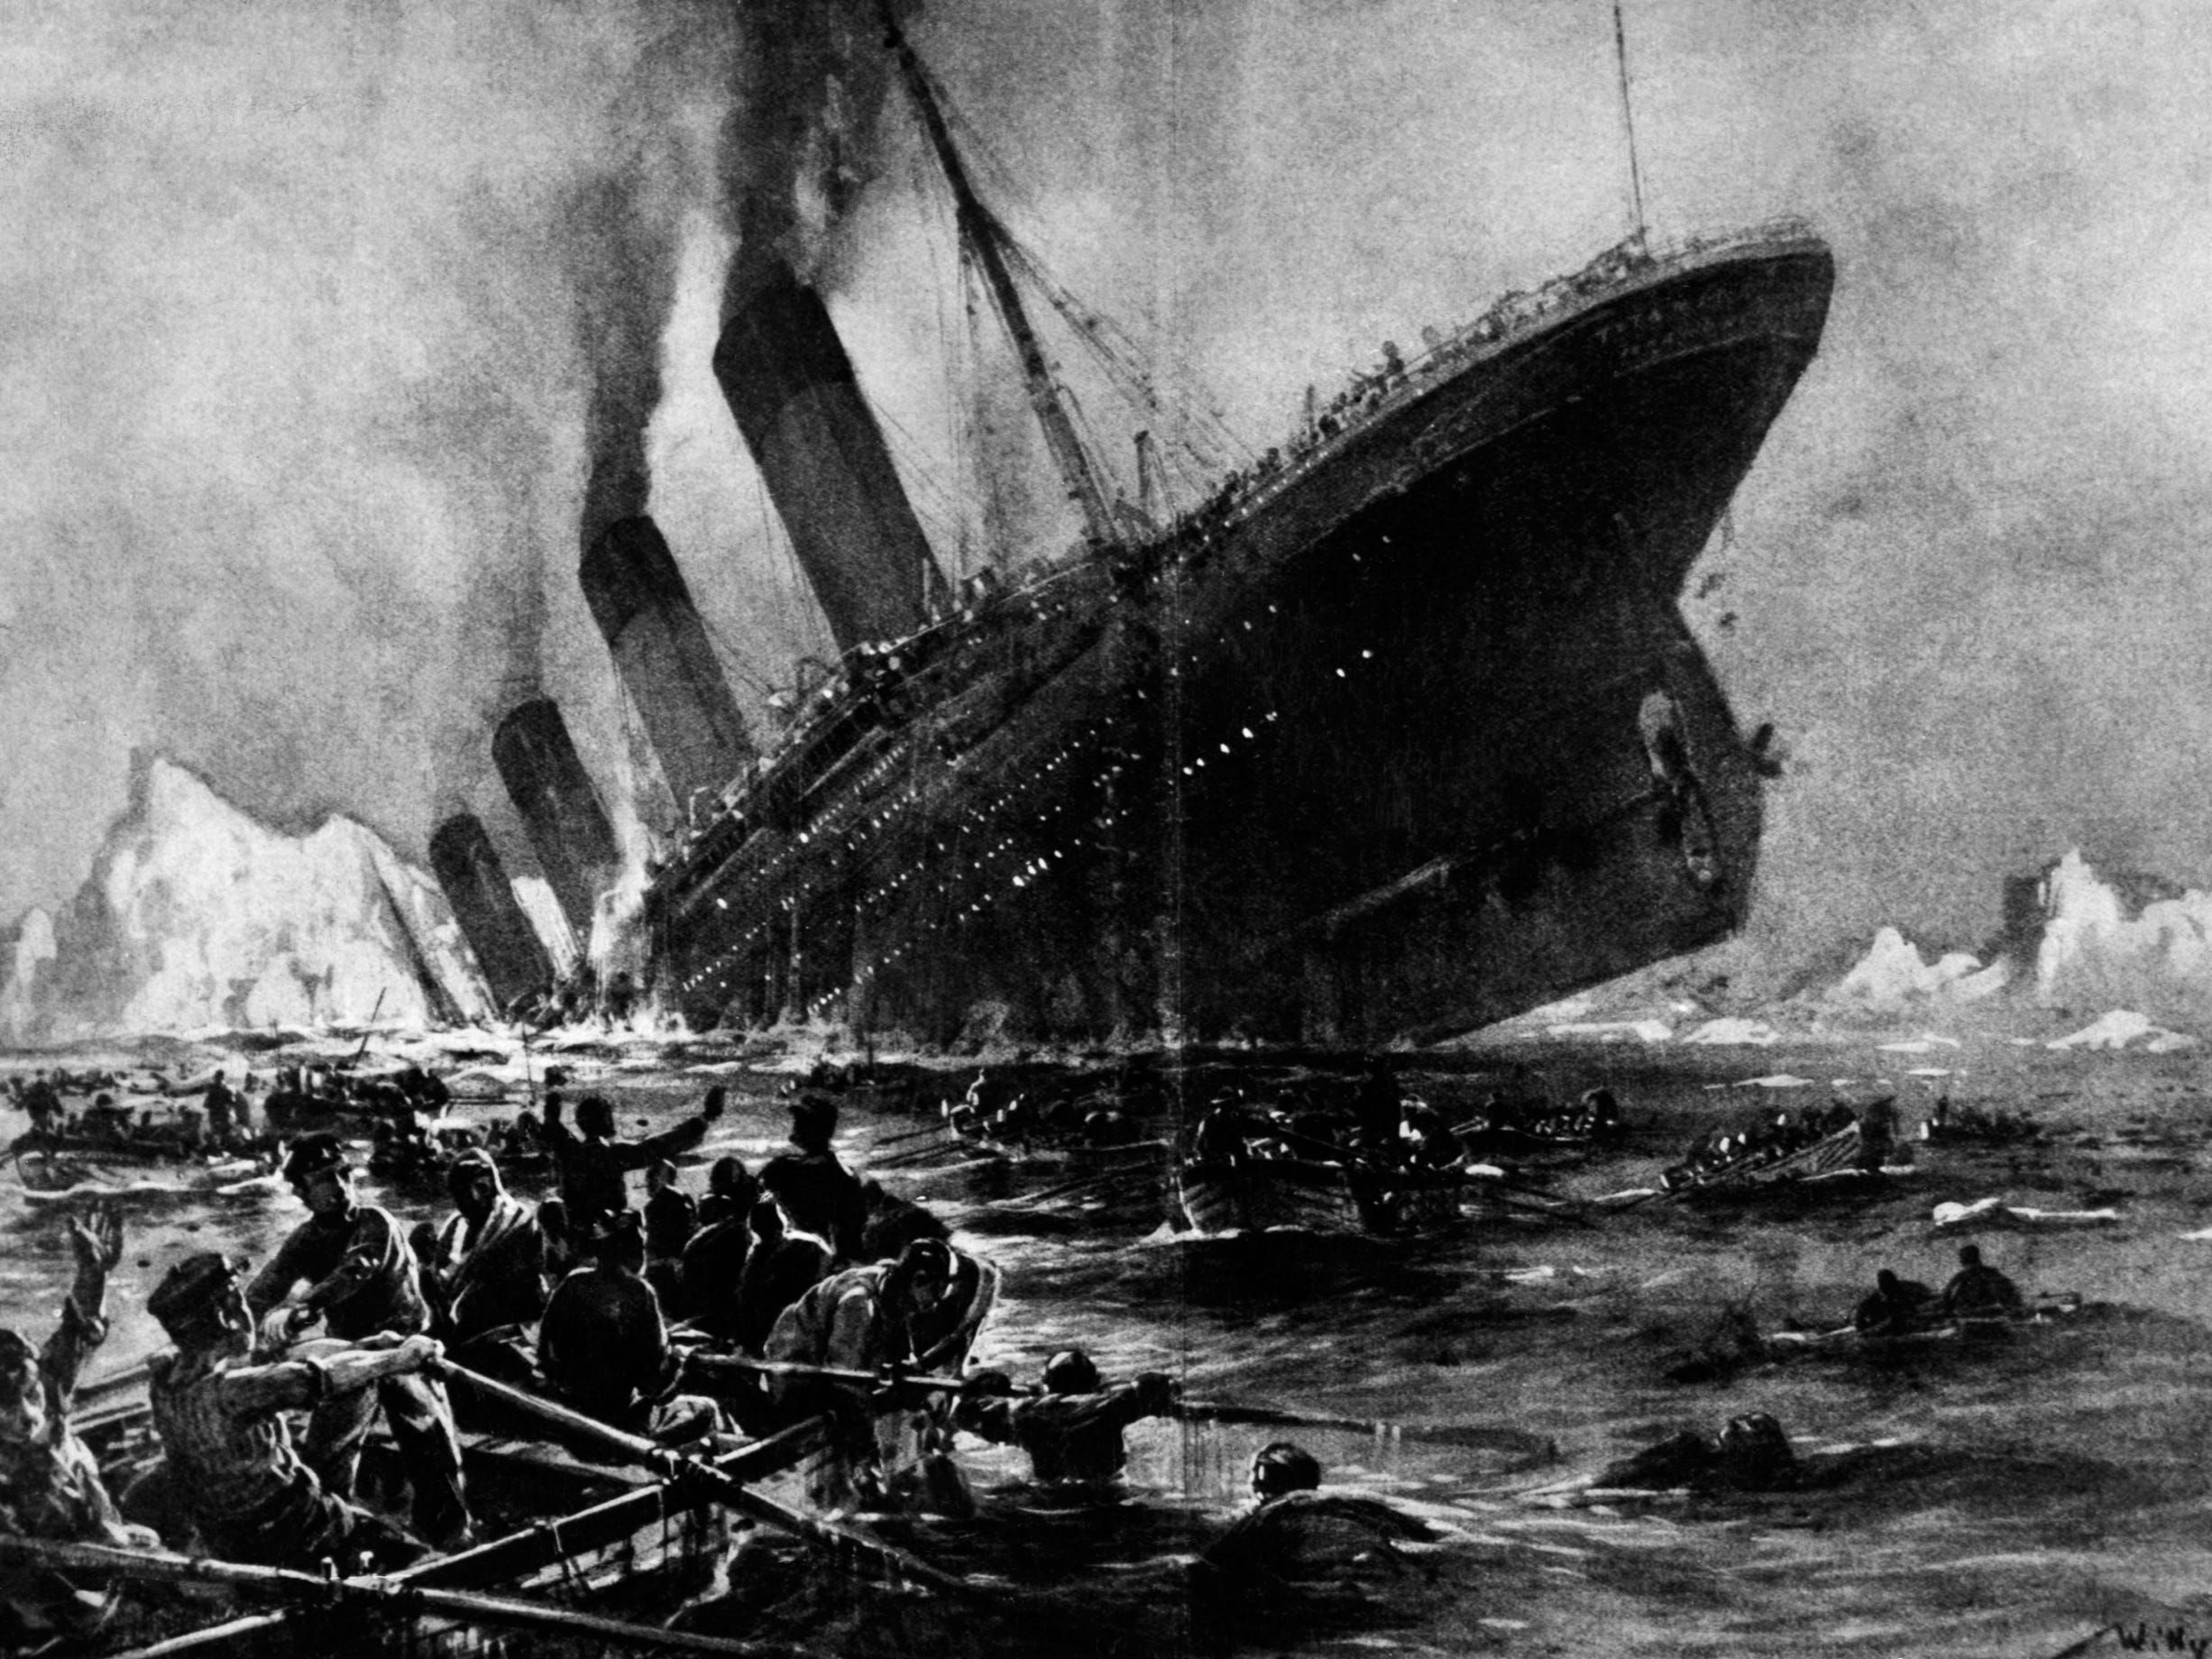 <p>After just an hour, <a href="https://www.britannica.com/topic/Titanic">the ship was quickly filling with water</a>, and passengers were panicked. Due to the water, the ship's bow continued to sink, causing the stern to rise into the sky.</p><p>By 2 a.m., the crew was released by the captain. Shortly after, <a href="https://www.insider.com/titanic-secrets-facts-2018-4#every-single-engineer-aboard-the-titanic-perished-they-all-stayed-behind-to-keep-the-ships-power-running-until-the-very-end-14">the Titanic's lights went out</a>, the ship broke into two pieces, and the bow sank beneath the waves. Twenty minutes later, the stern followed suit, sending hundreds of crewmembers and passengers into the sea.</p>